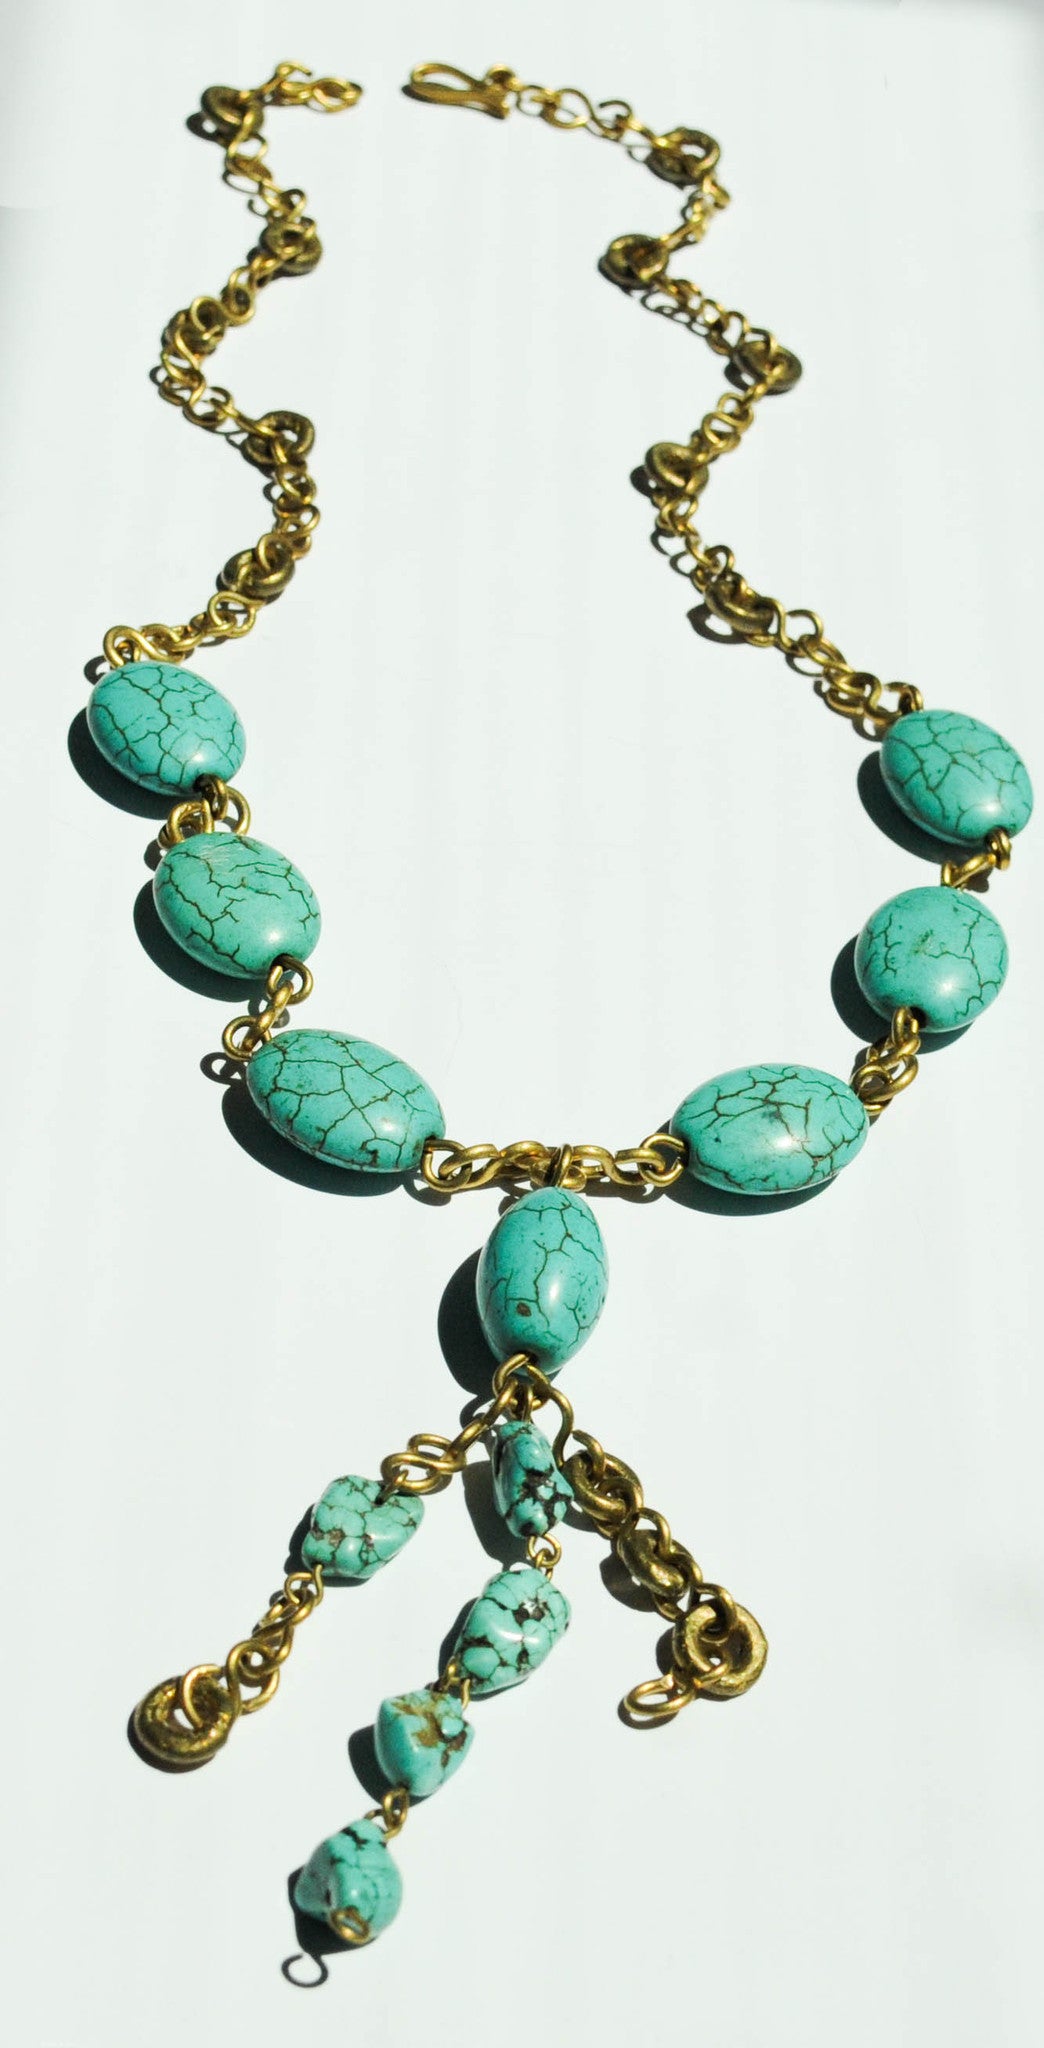 Mombasa Necklace - Kenyan materials and design for a fair trade boutique